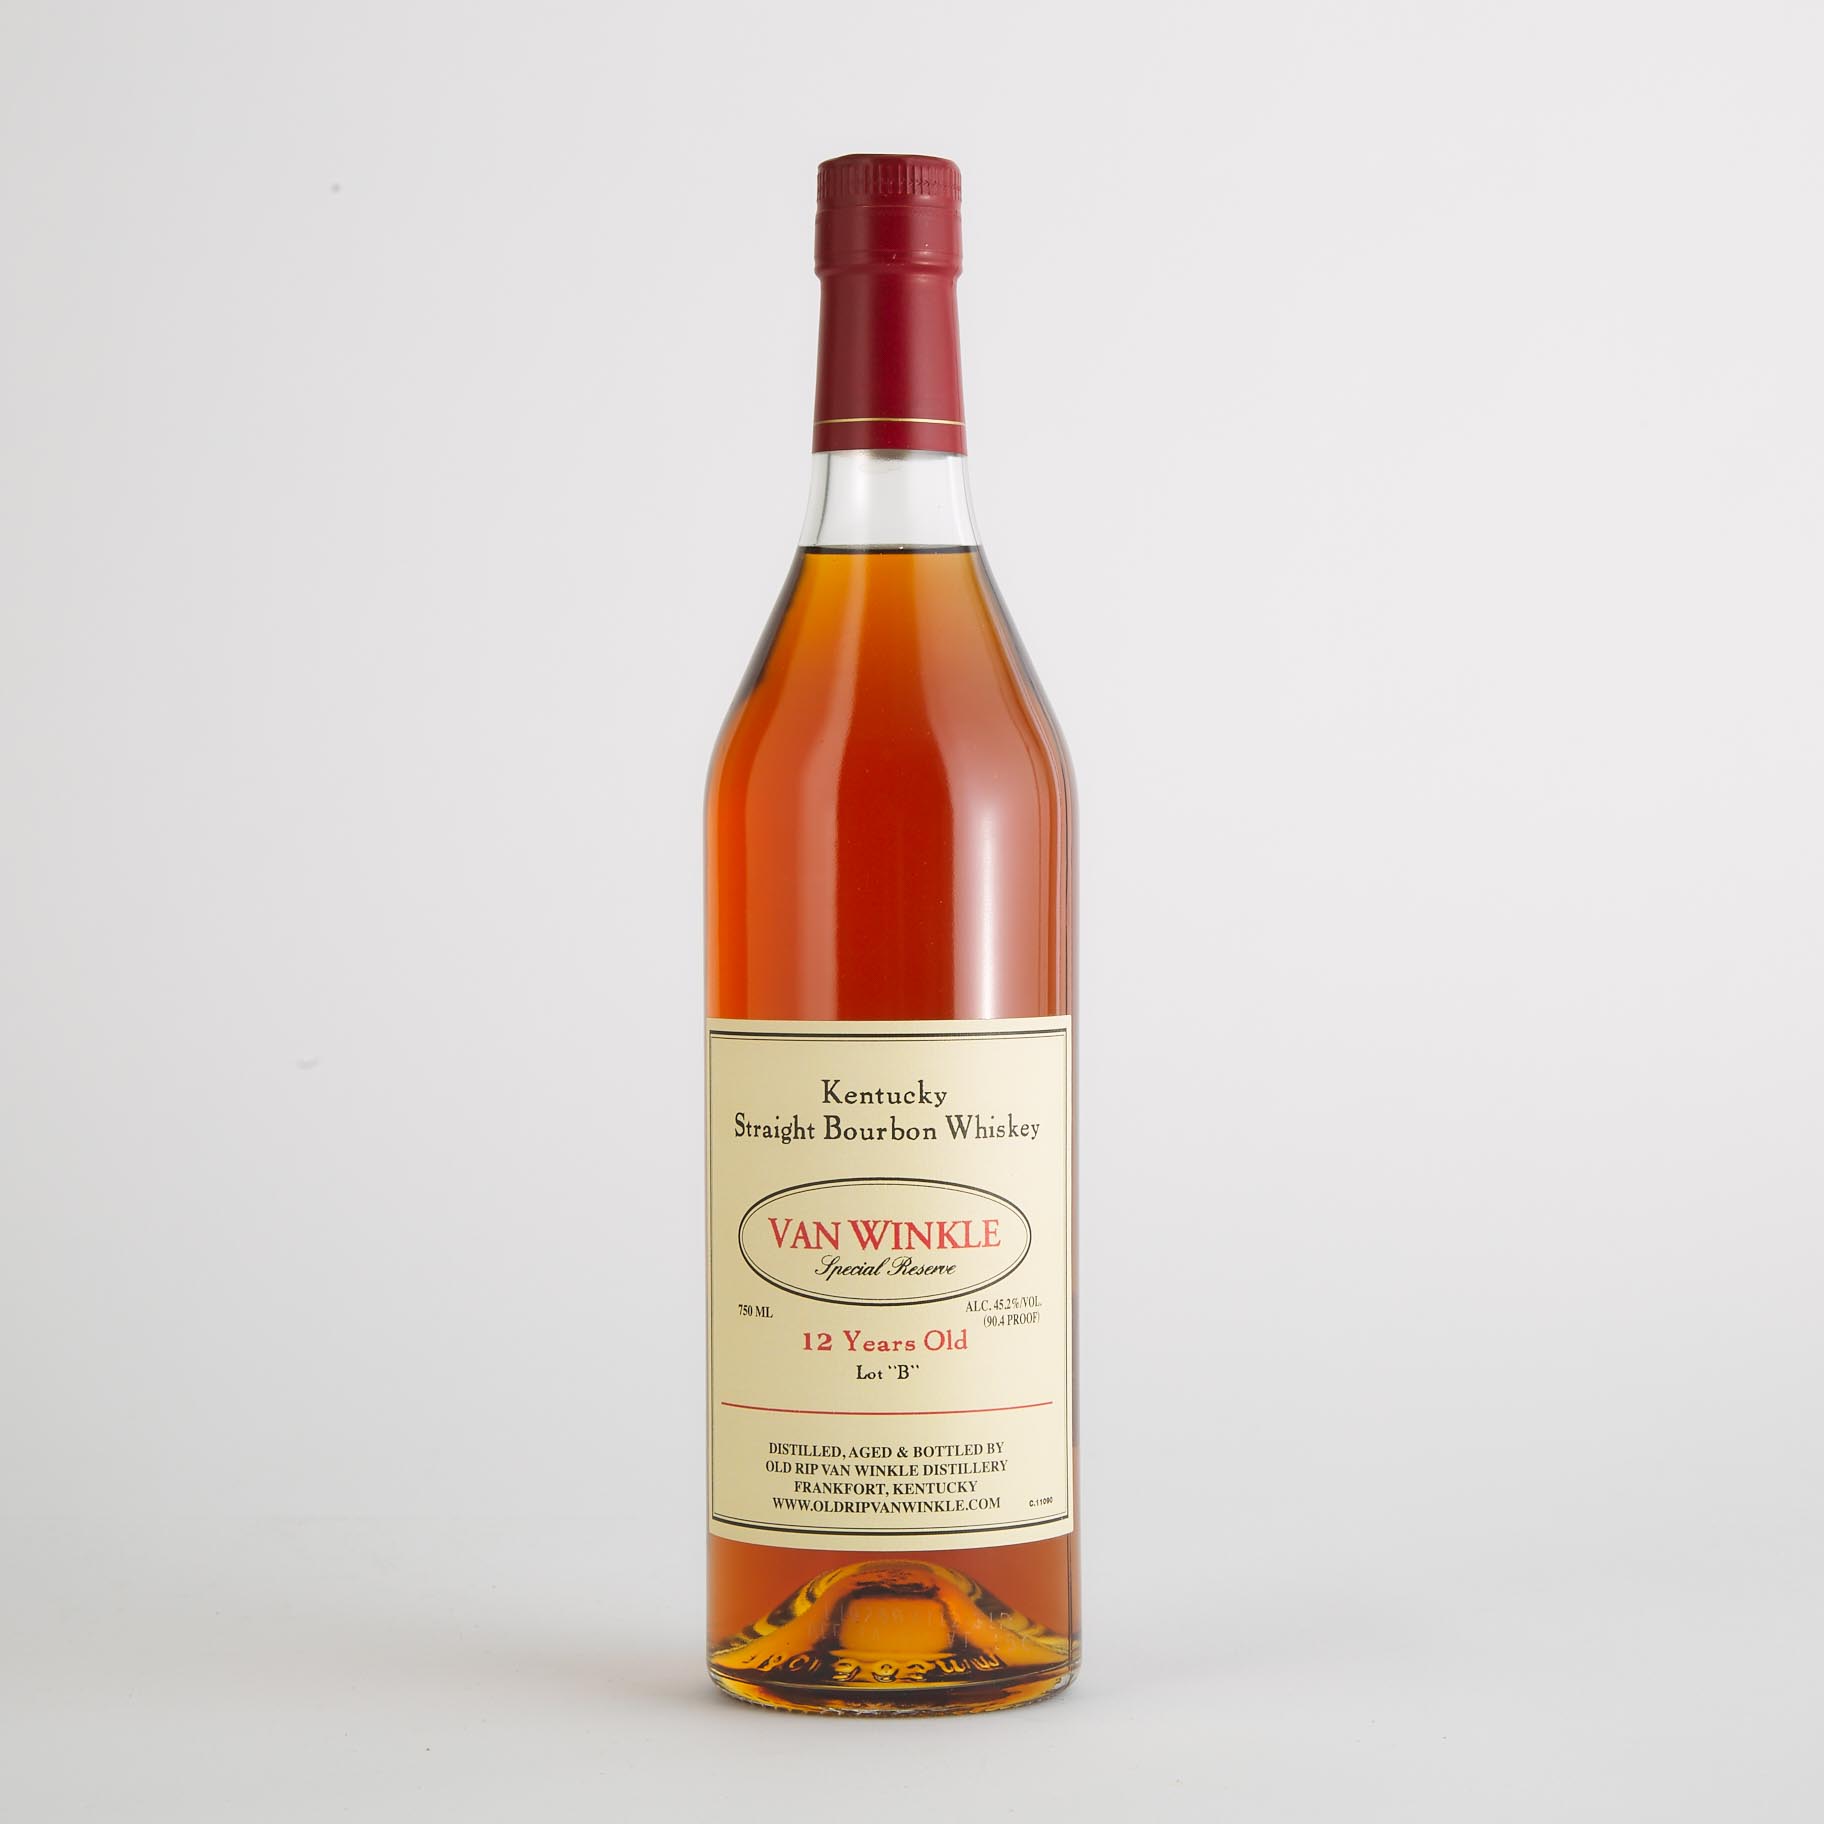 VAN WINKLE SPECIAL RESERVE "LOT 'B'" KENTUCKY STRAIGHT BOURBON WHISKEY 12 YEARS (ONE 750 ML)